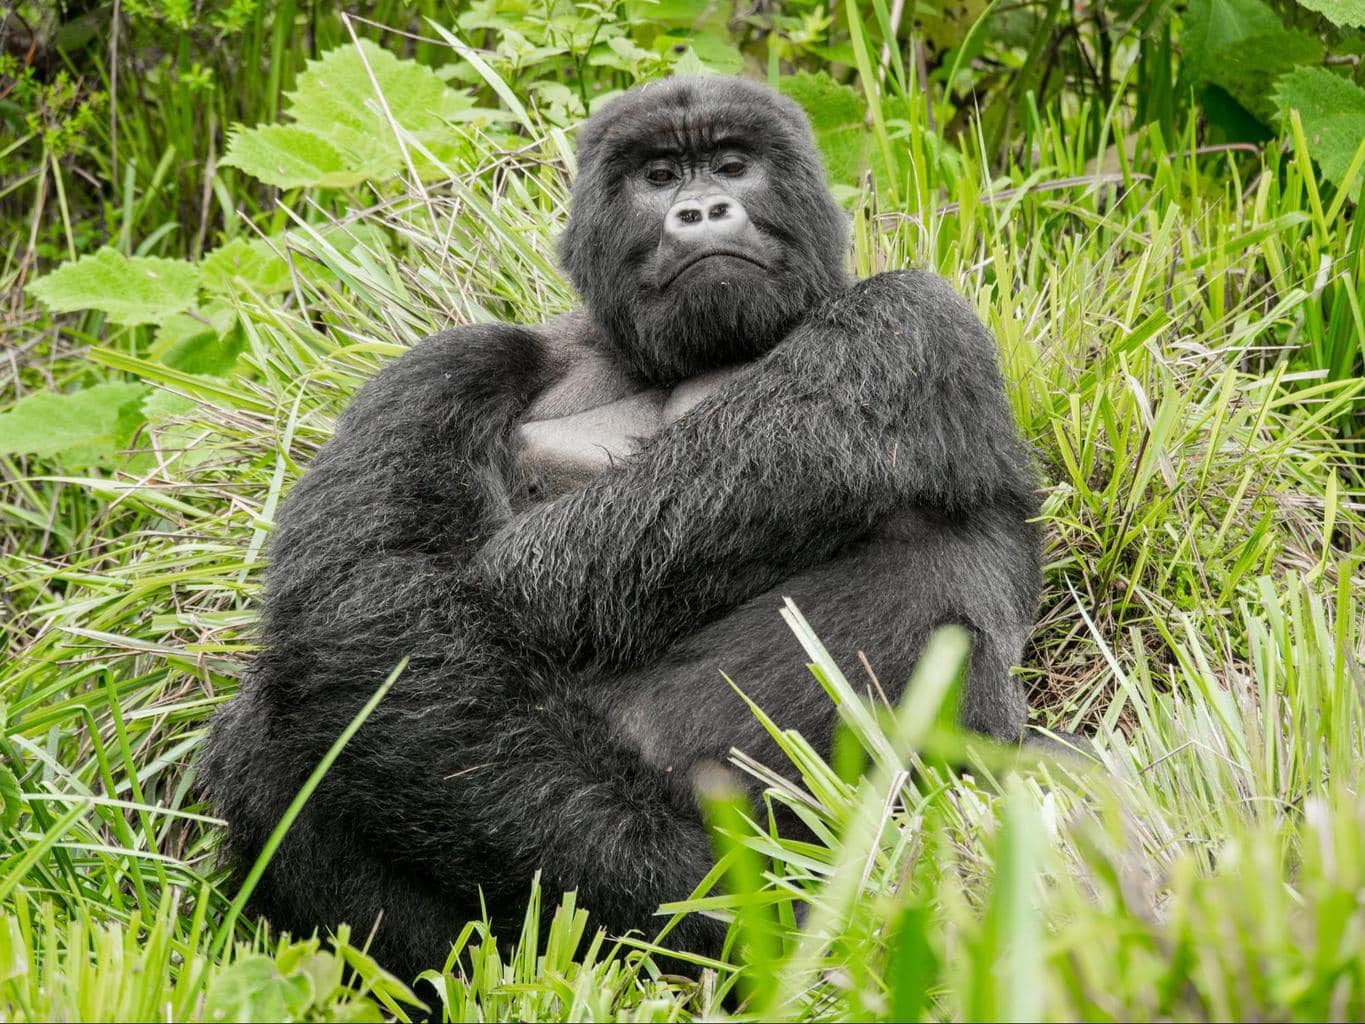 The silverback, calm but imposing